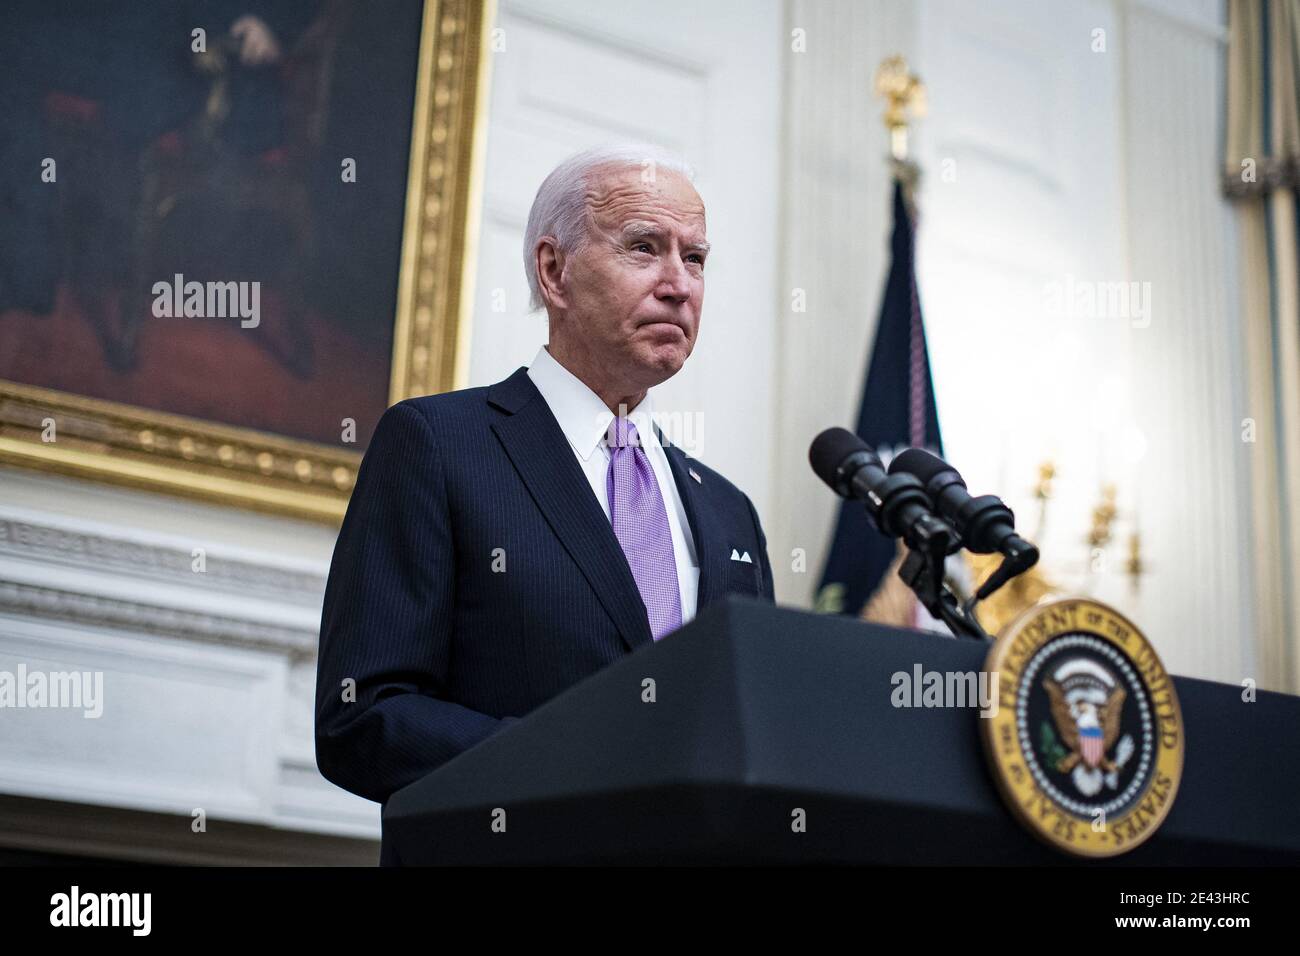 U.S. President Joe Biden speaks on his administrationâÂ€Â™s Covid-19 response in the State Dining Room of the White House in Washington, D.C., U.S., on Thursday, Jan. 21, 2021. Biden in his first full day in office plans to issue a sweeping set of executive orders to tackle the raging Covid-19 pandemic that will rapidly reverse or refashion many of his predecessor's most heavily criticized policies. Photo by Al Drago/Pool/ABACAPRESS.COM Stock Photo